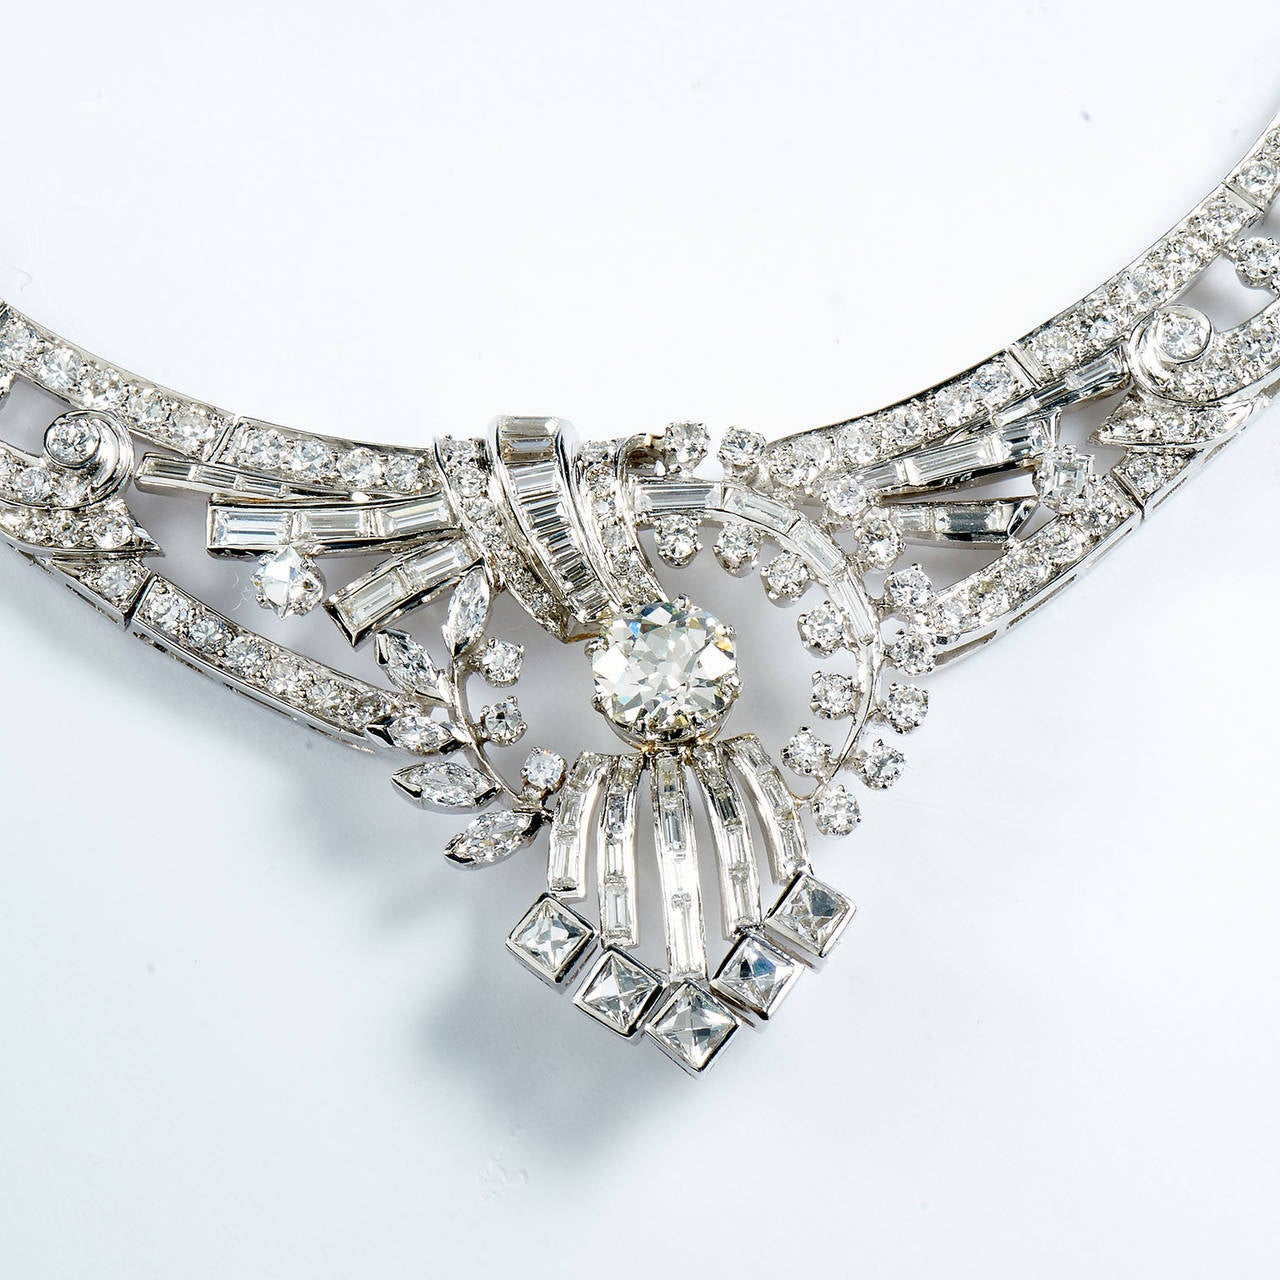 This statement piece stimulates the senses and transports one to the glamour of the Great Gatsby. Dropping you into a scene of elegance showcasing meticulously dressed party guests wearing white gloves while sipping champagne under that stars at one